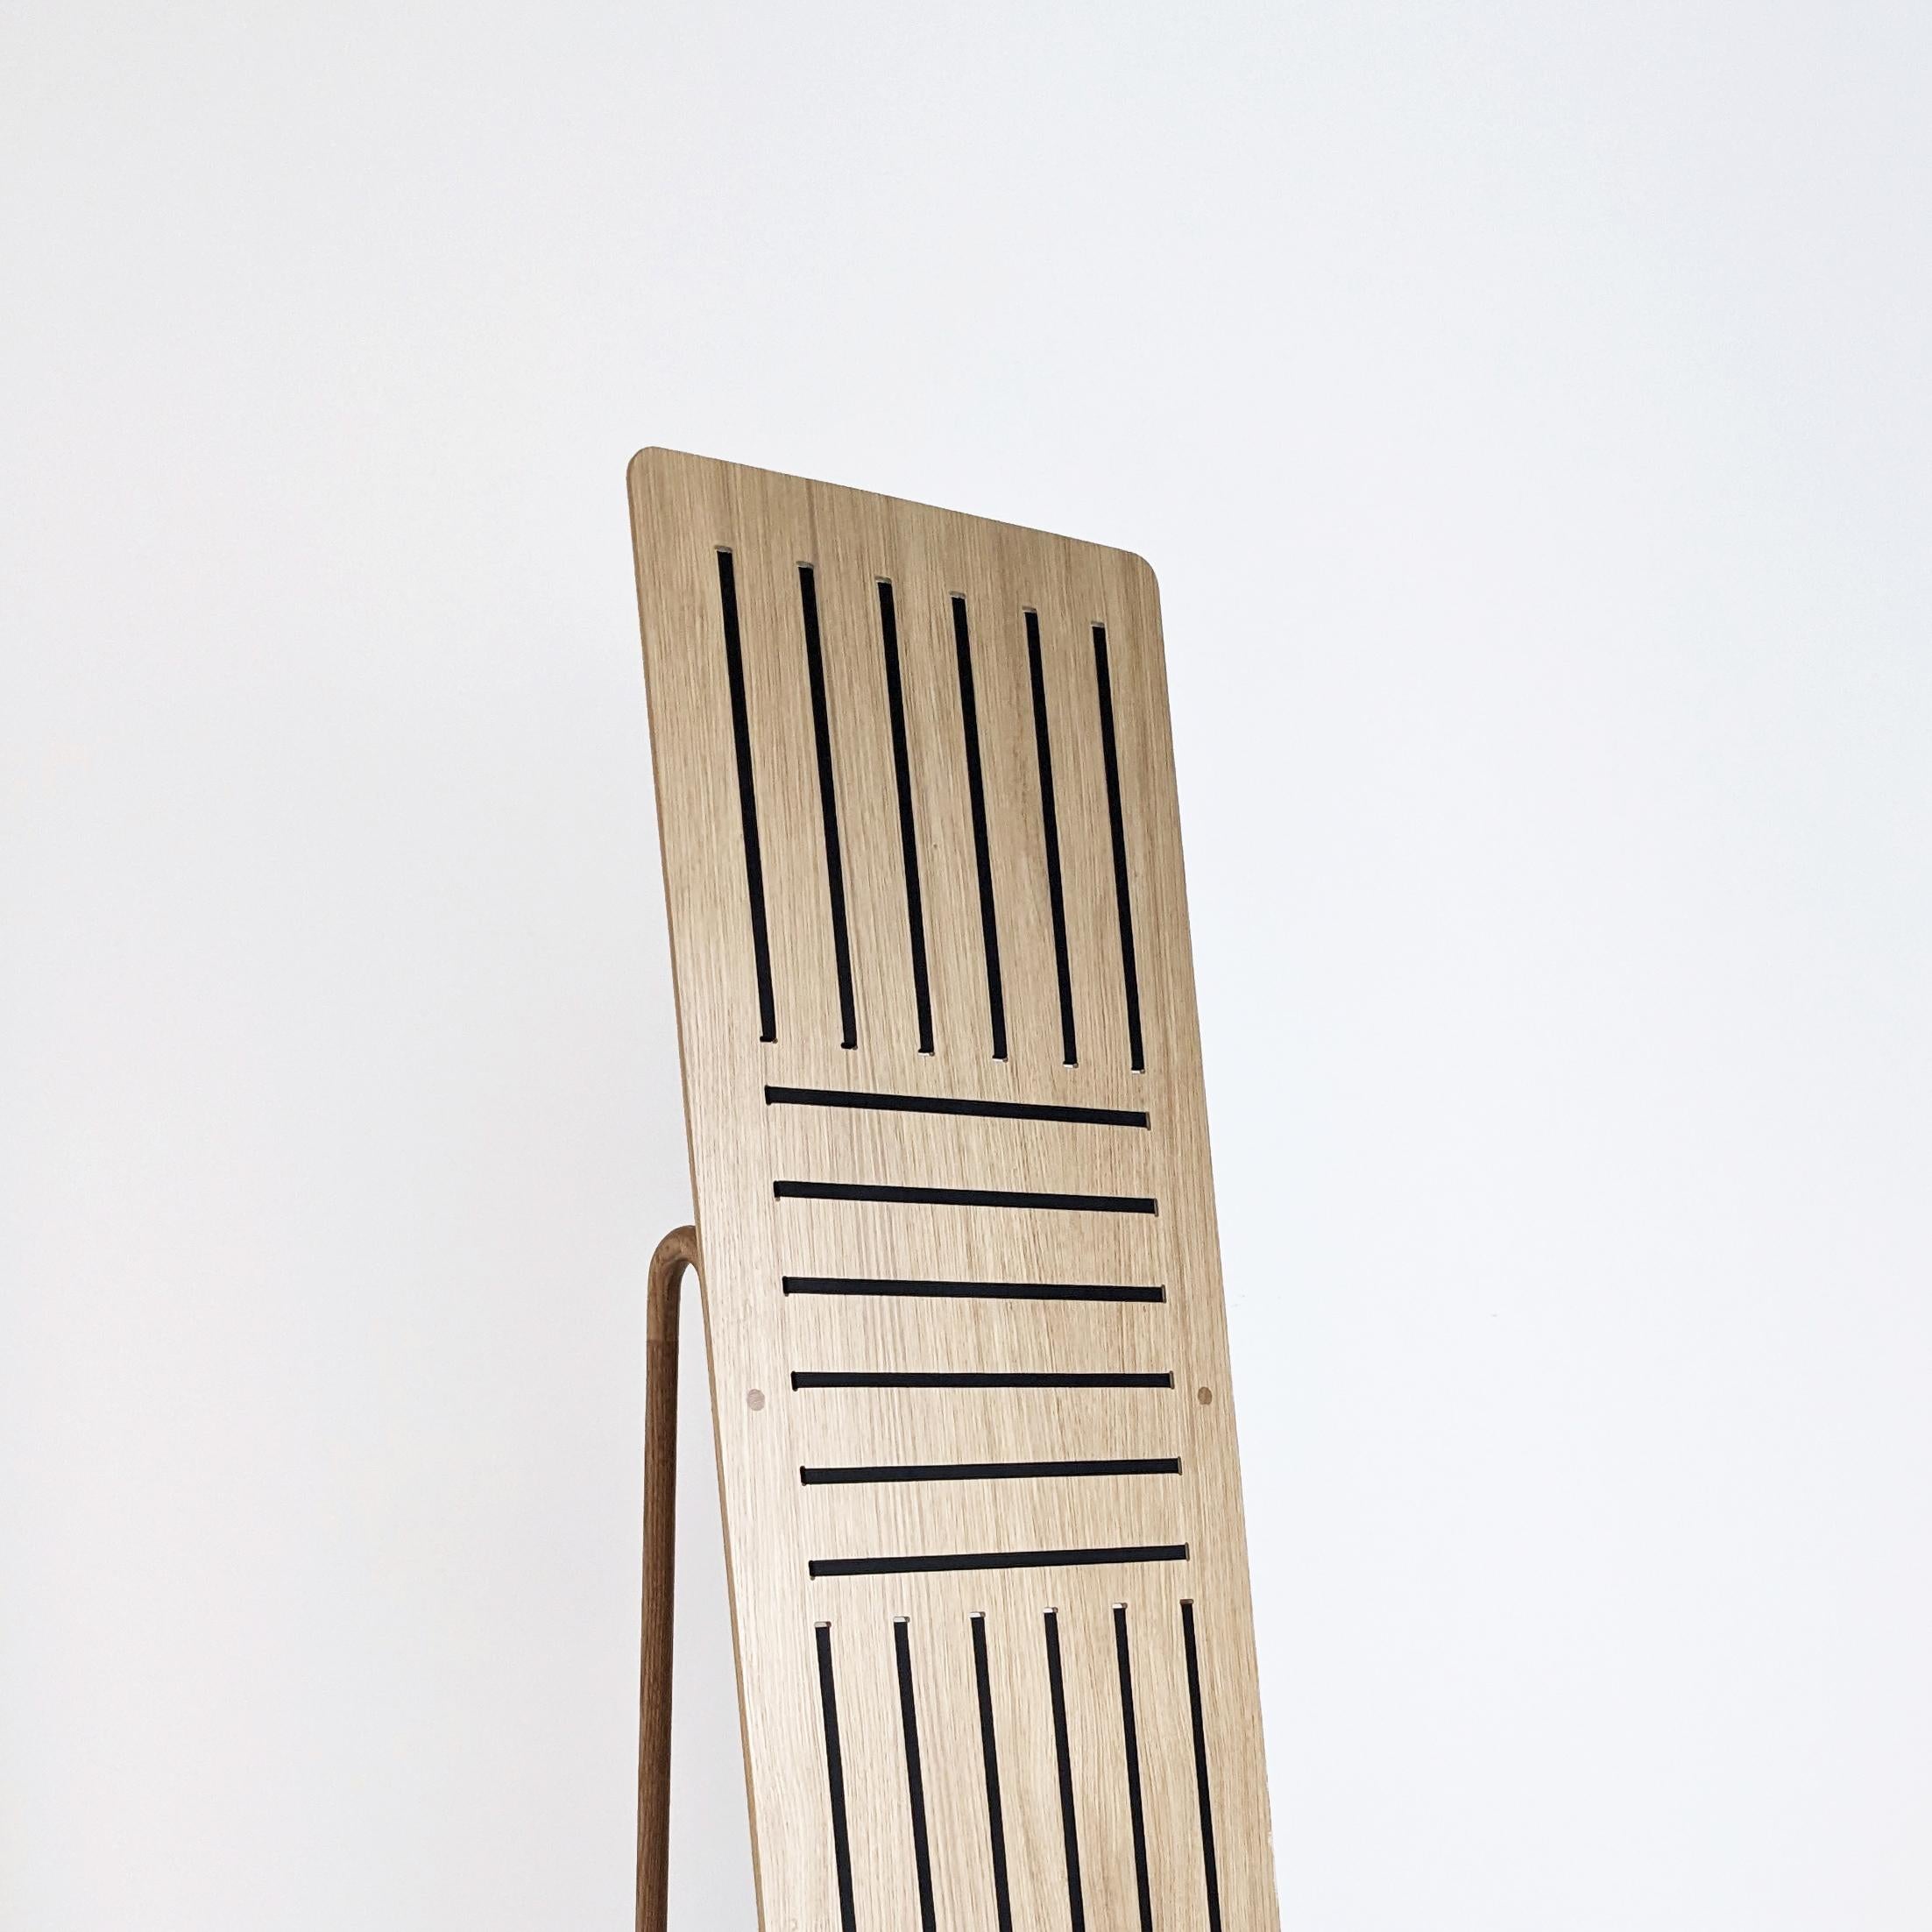 Contemporary Strip Standing Wood, Display for Flat Objects by Lotti Gostic Studio For Sale